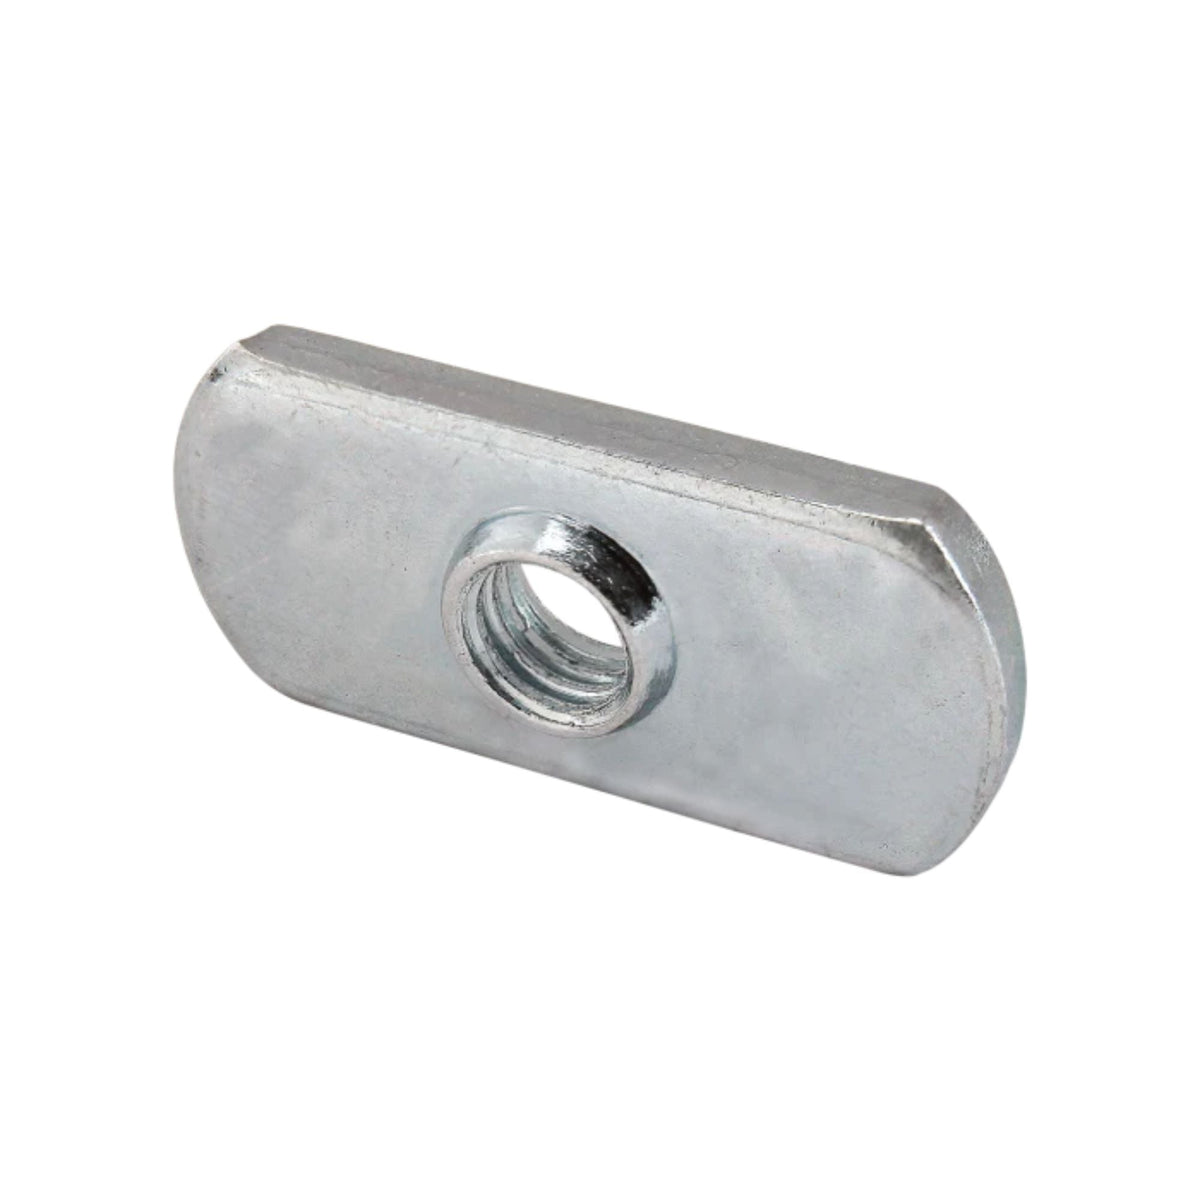 side view of a metal, rectangular t-nut with rounded ends and a threaded hole in the center